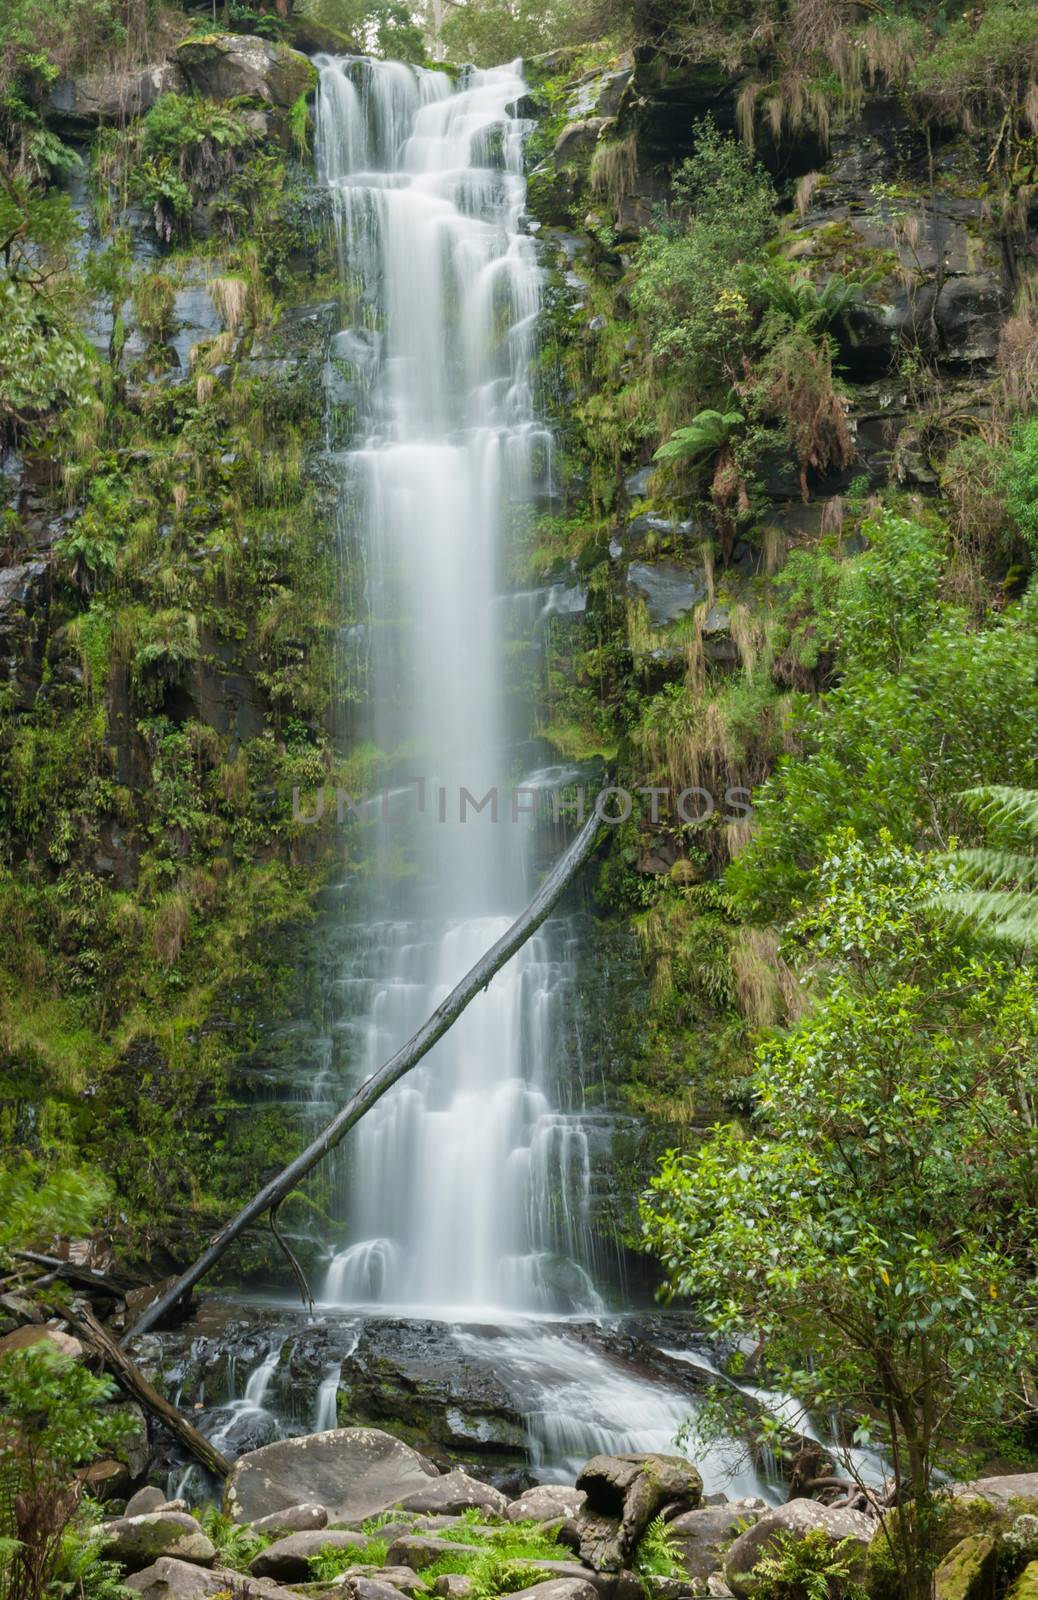 Erskine Falls are located near the Great Ocean road on the Southern Coast of state Victoria, Australia